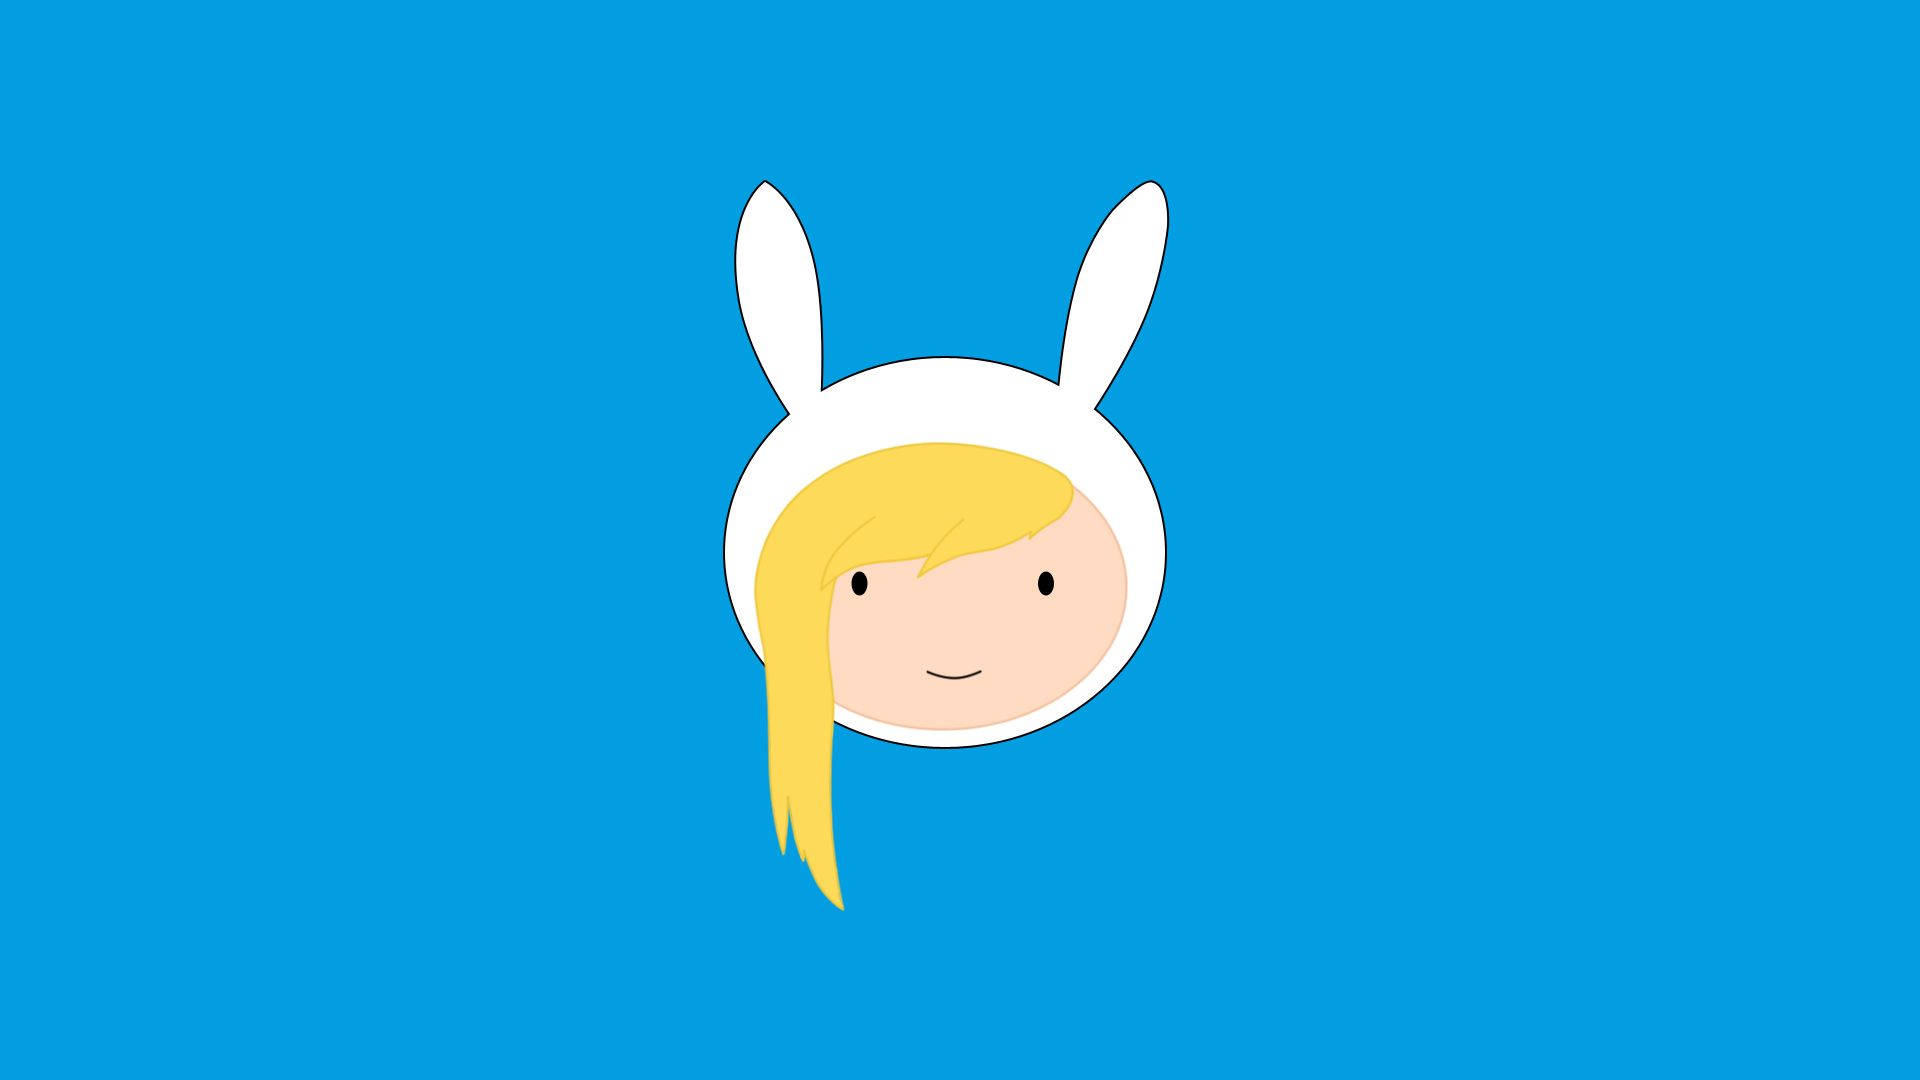 Adventure Time Fionna The Human Background